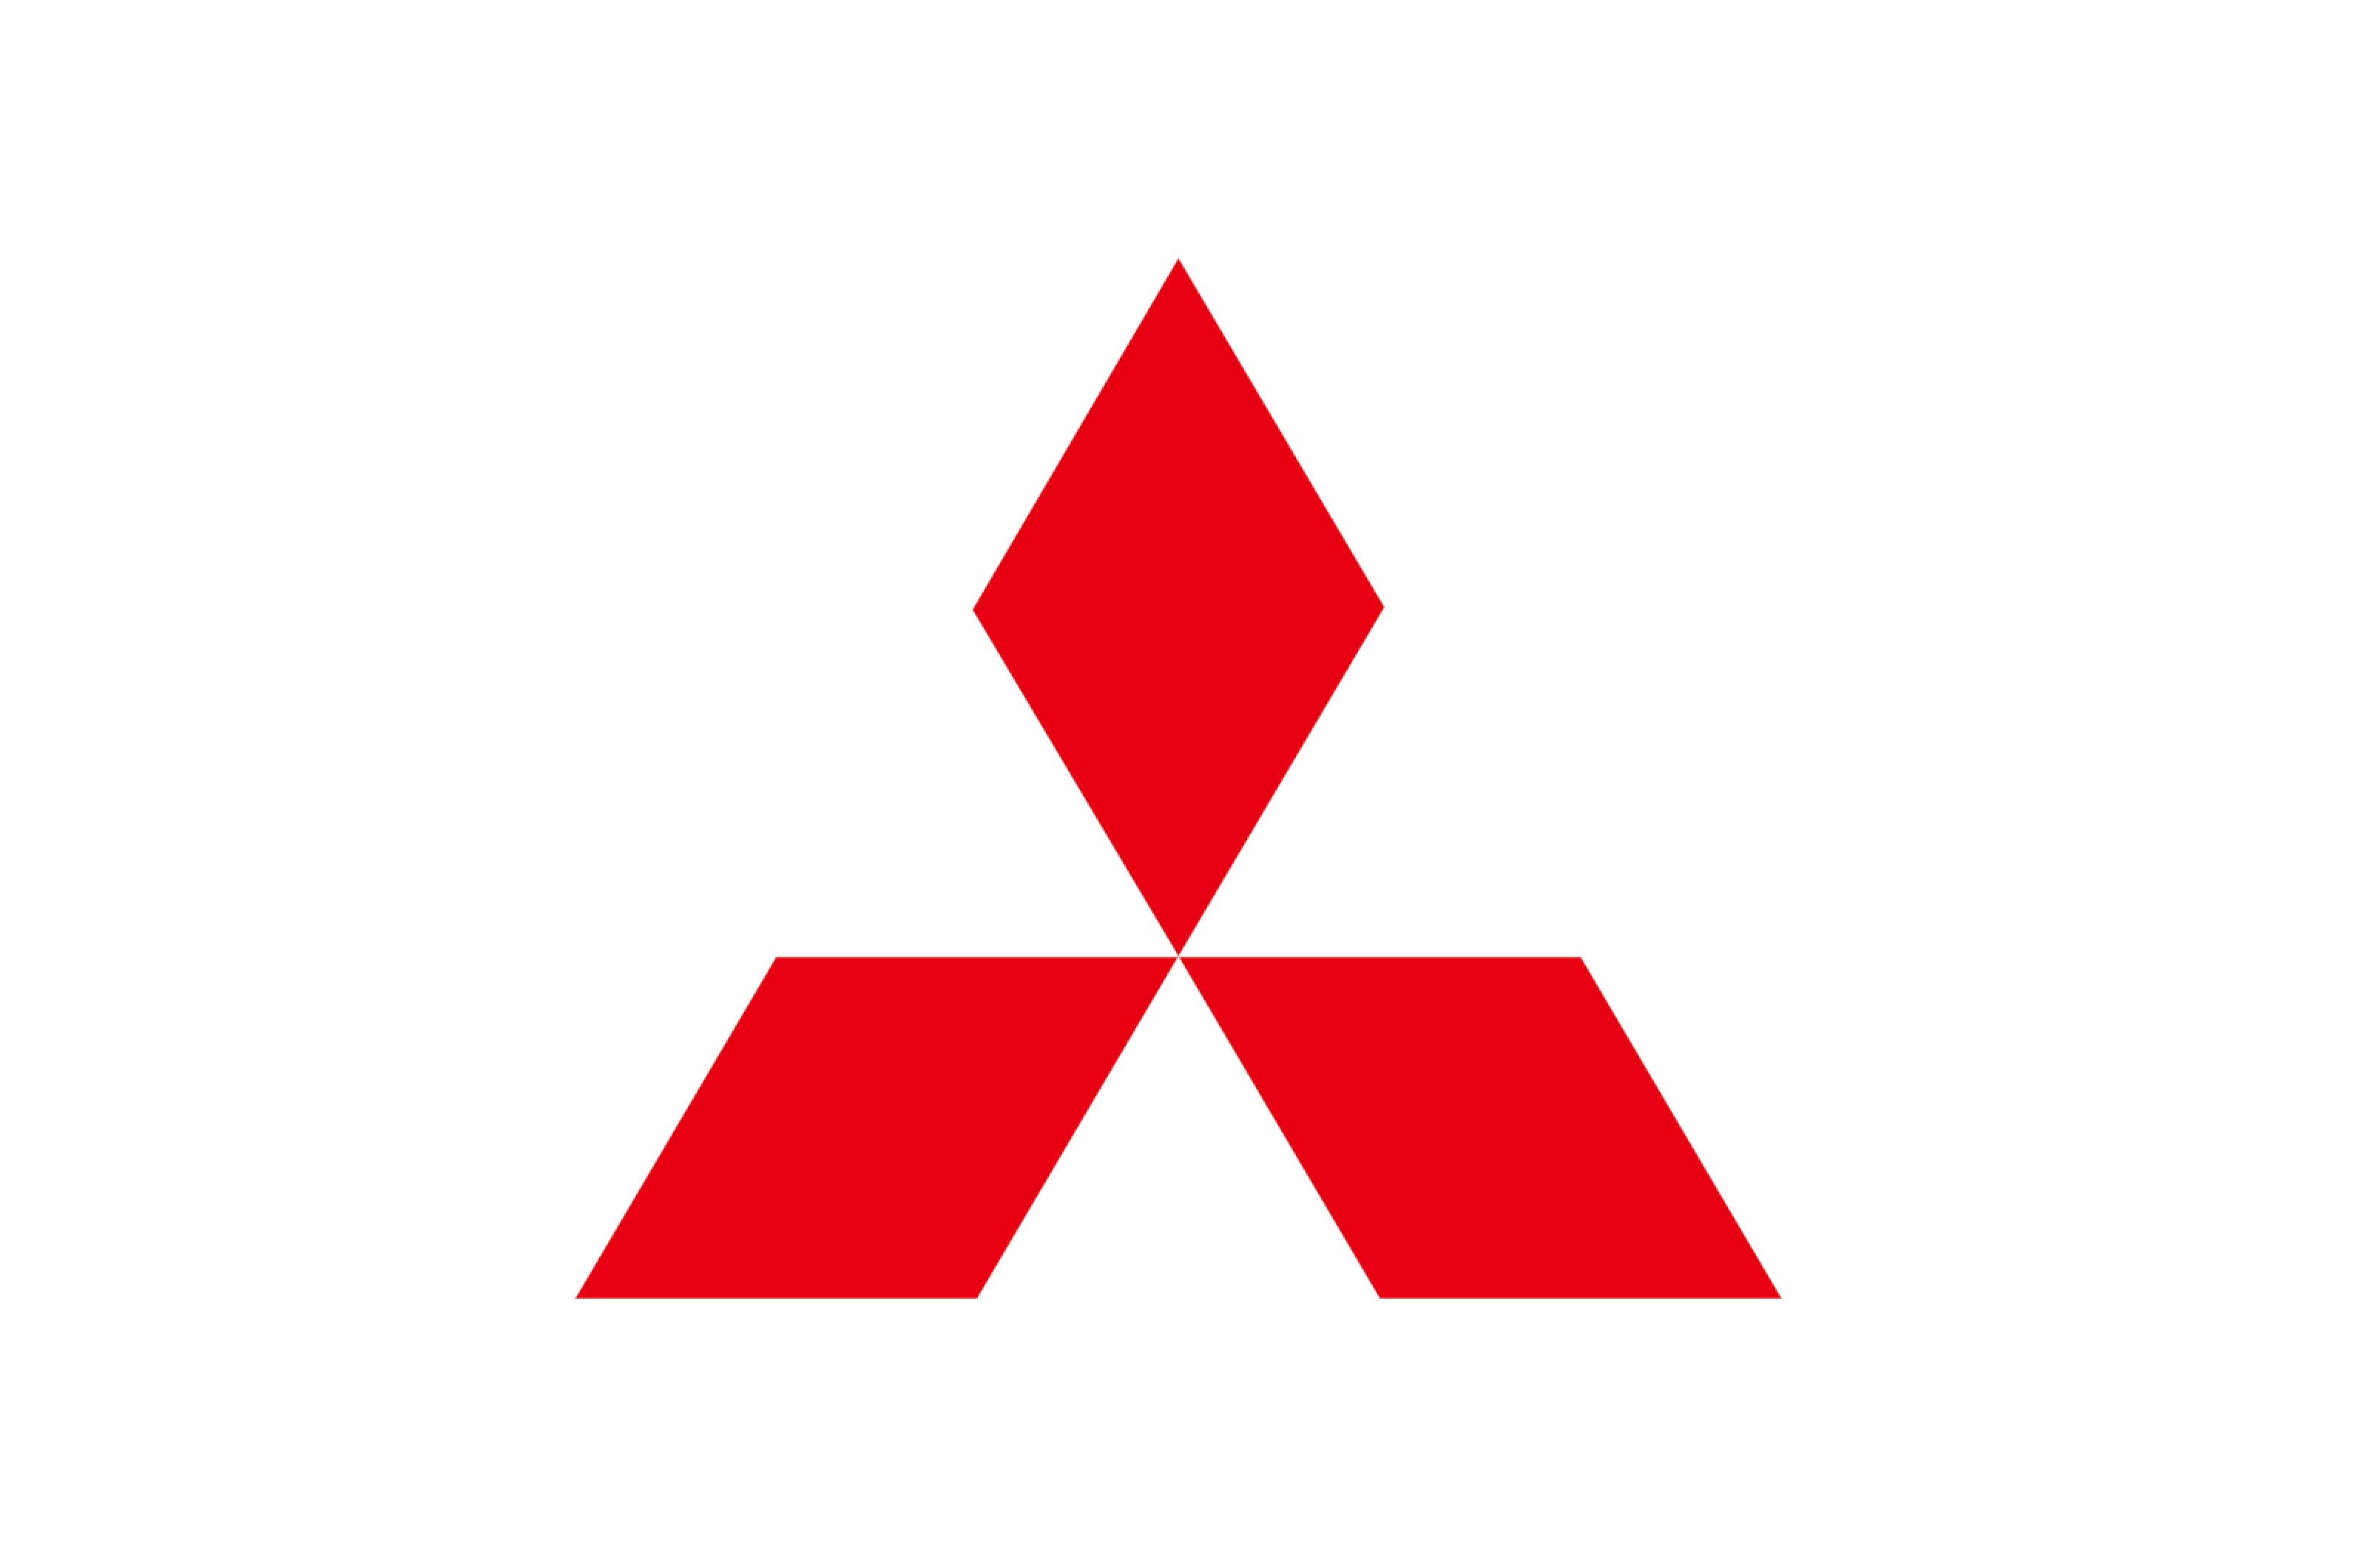 <p>Mitsubishi has one of the oldest logos in the motor industry. It dates back to the 1870s, when the company was established as a shipping firm, and consists of three diamond shapes, or rhombuses, arranged in a triangle.</p>  <p>There were two influences for this. Mitsubishi was founded by Iwasaki Yatarō, whose family crest consisted of three stacked rhombuses. His first employer was the Yamauchi clan, whose crest represents three oak leaves arranged in the same format as the diamonds in the Mitsubishi logo.</p>  <p>The company’s name also describes its logo. Mitsu hishi translates from Japanese as either ‘three water chestnuts’ or ‘three diamonds’. When an ‘h’ appears in the middle of a word it is often changed to a ‘b’, hence Mitsubishi.</p>